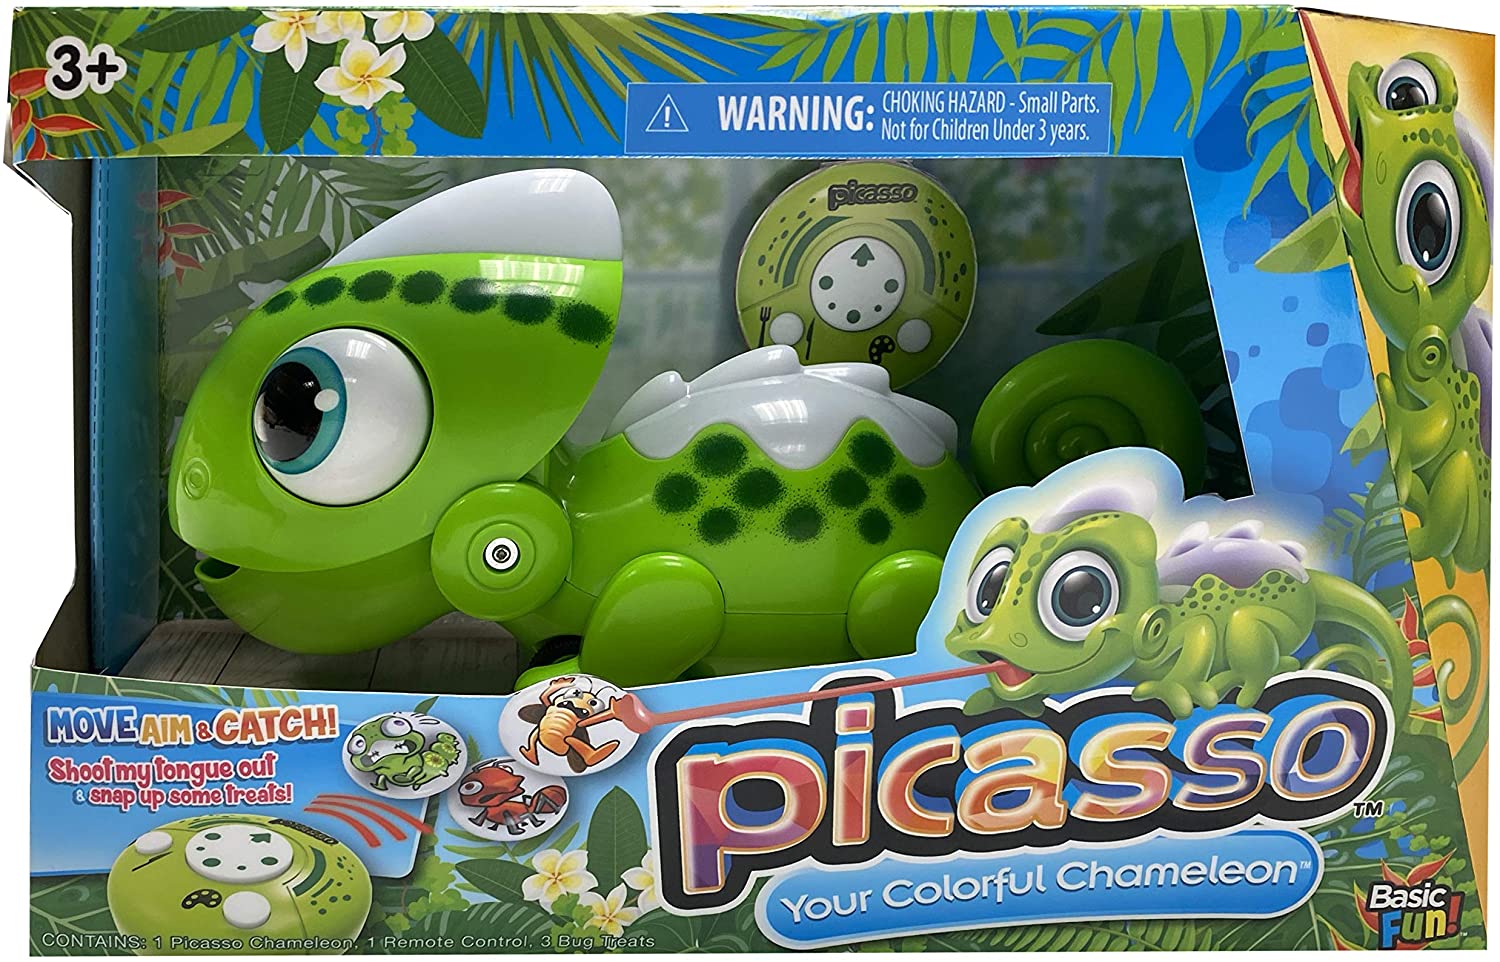 Basic Fun Anipets - Picasso: The Colorful Robo Chameleon RC Toy $5.20 + Free Shipping w/ Amazon Prime or Orders $25+